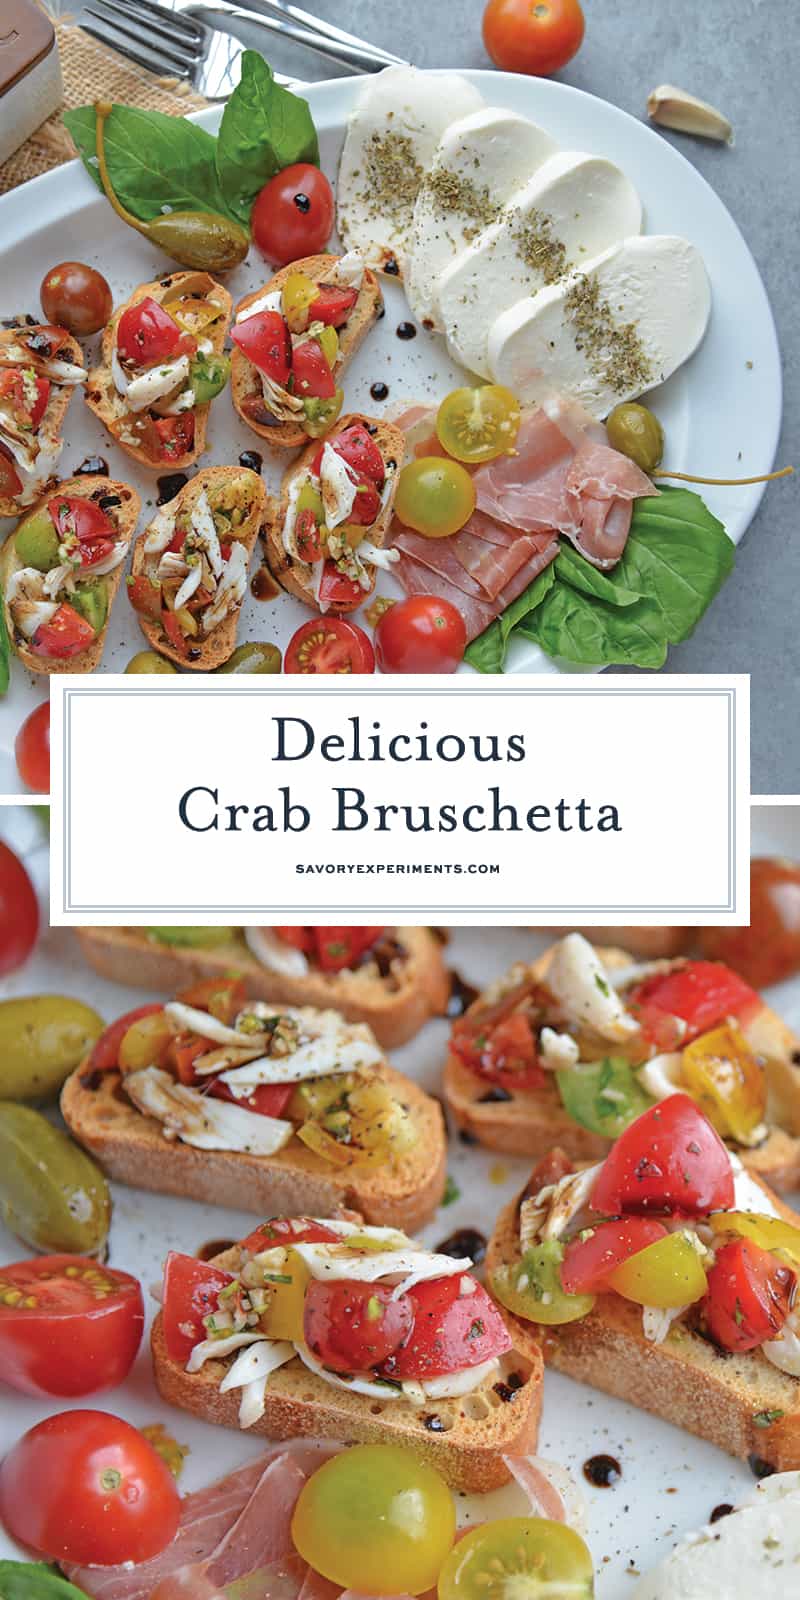 Crab Bruschetta is a mound of fresh tomatoes, garlic basil and buttery crab meat piled high on crispy toast. This is one of the best appetizers out there! #crabbruschetta #easybruschetta www.savoryexperiments.com